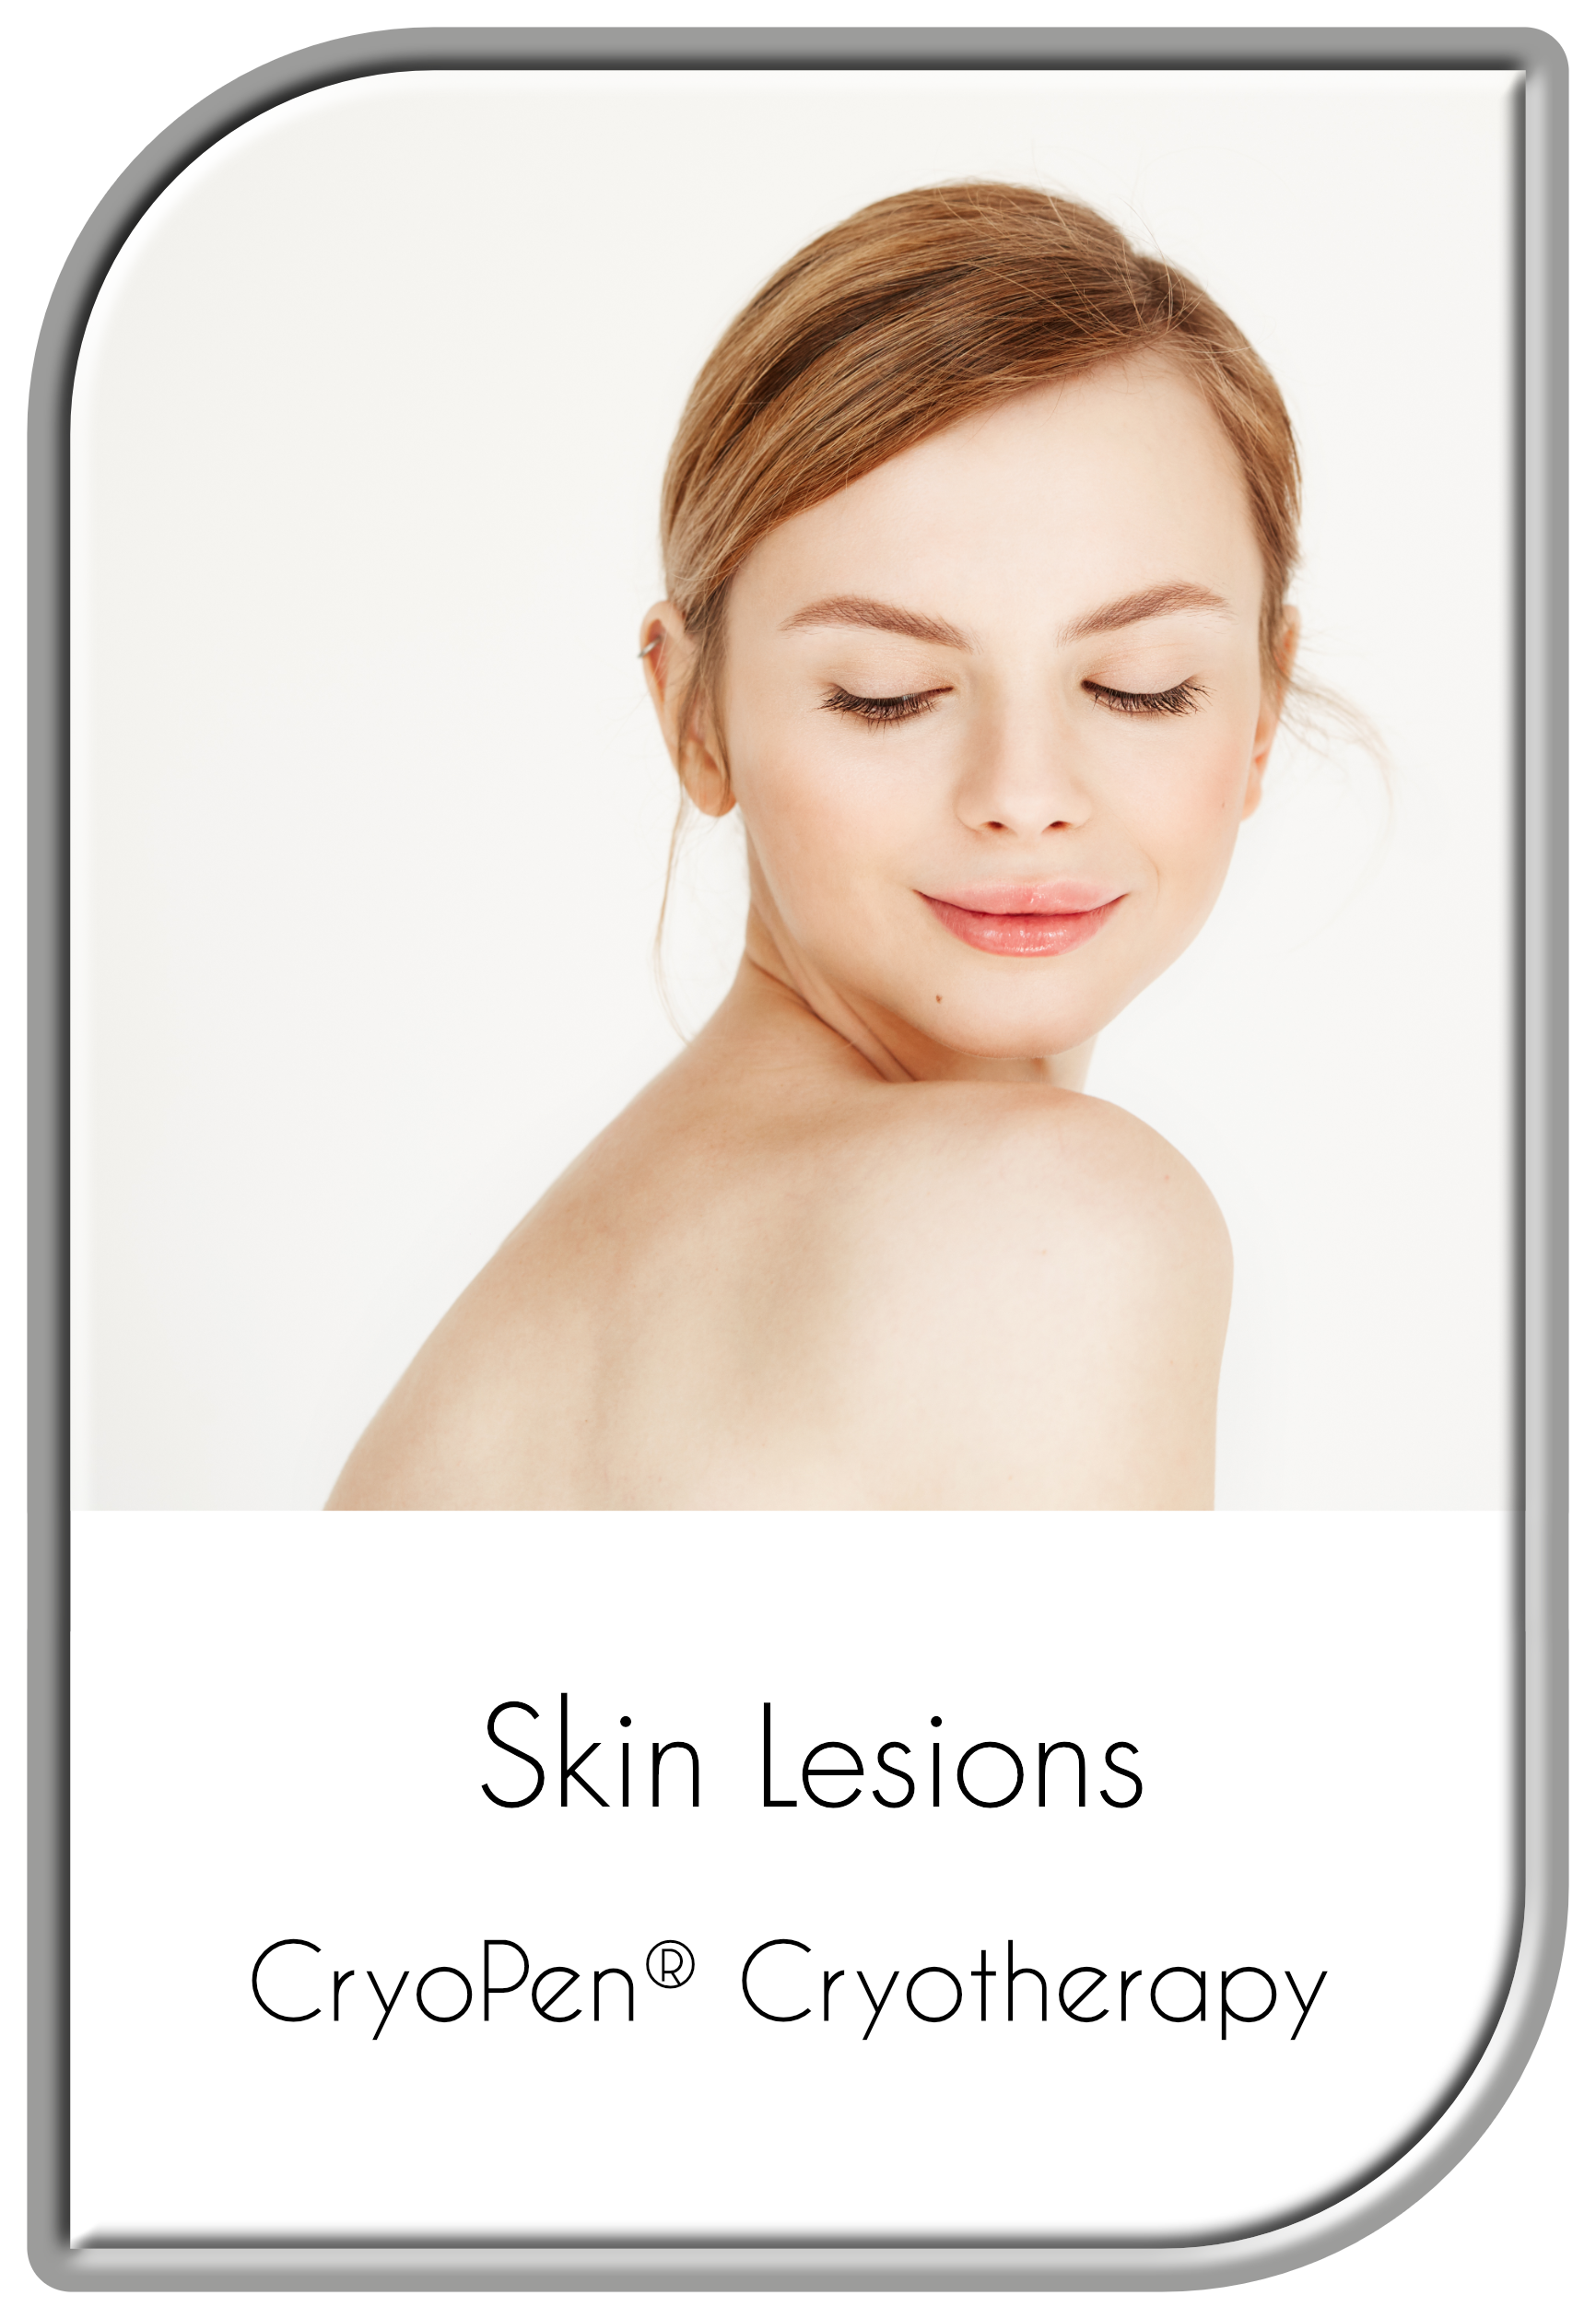 Cryotherapy for Skin Lesions